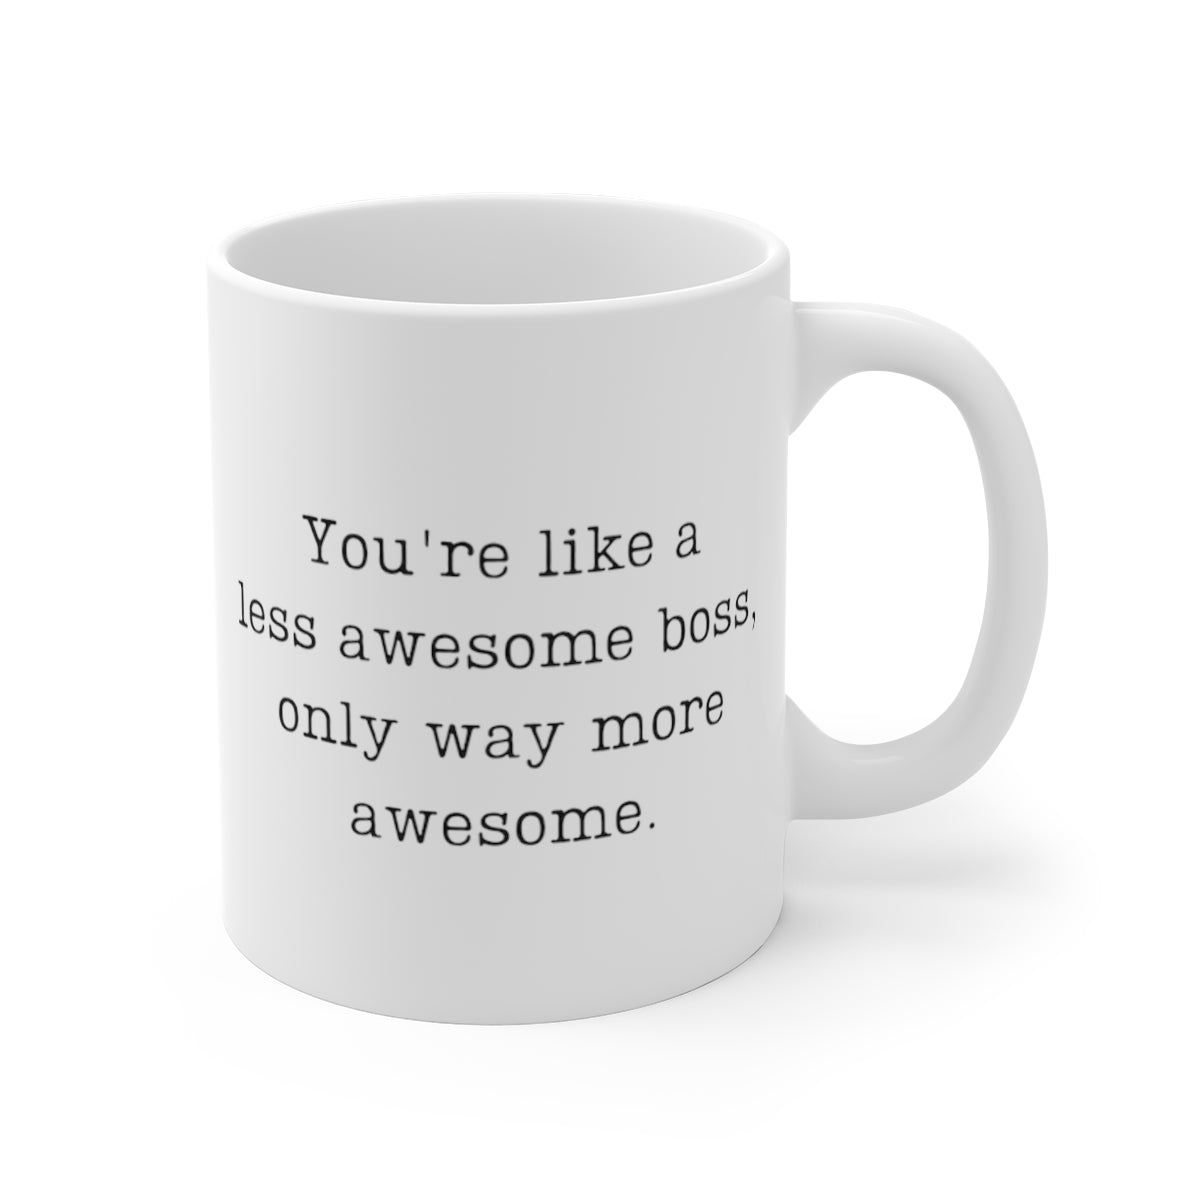 You're Like A Less Awesome Boss, Only Way More Awesome | Funny, Snarky Gift | White Ceramic Mug, Typewriter Font